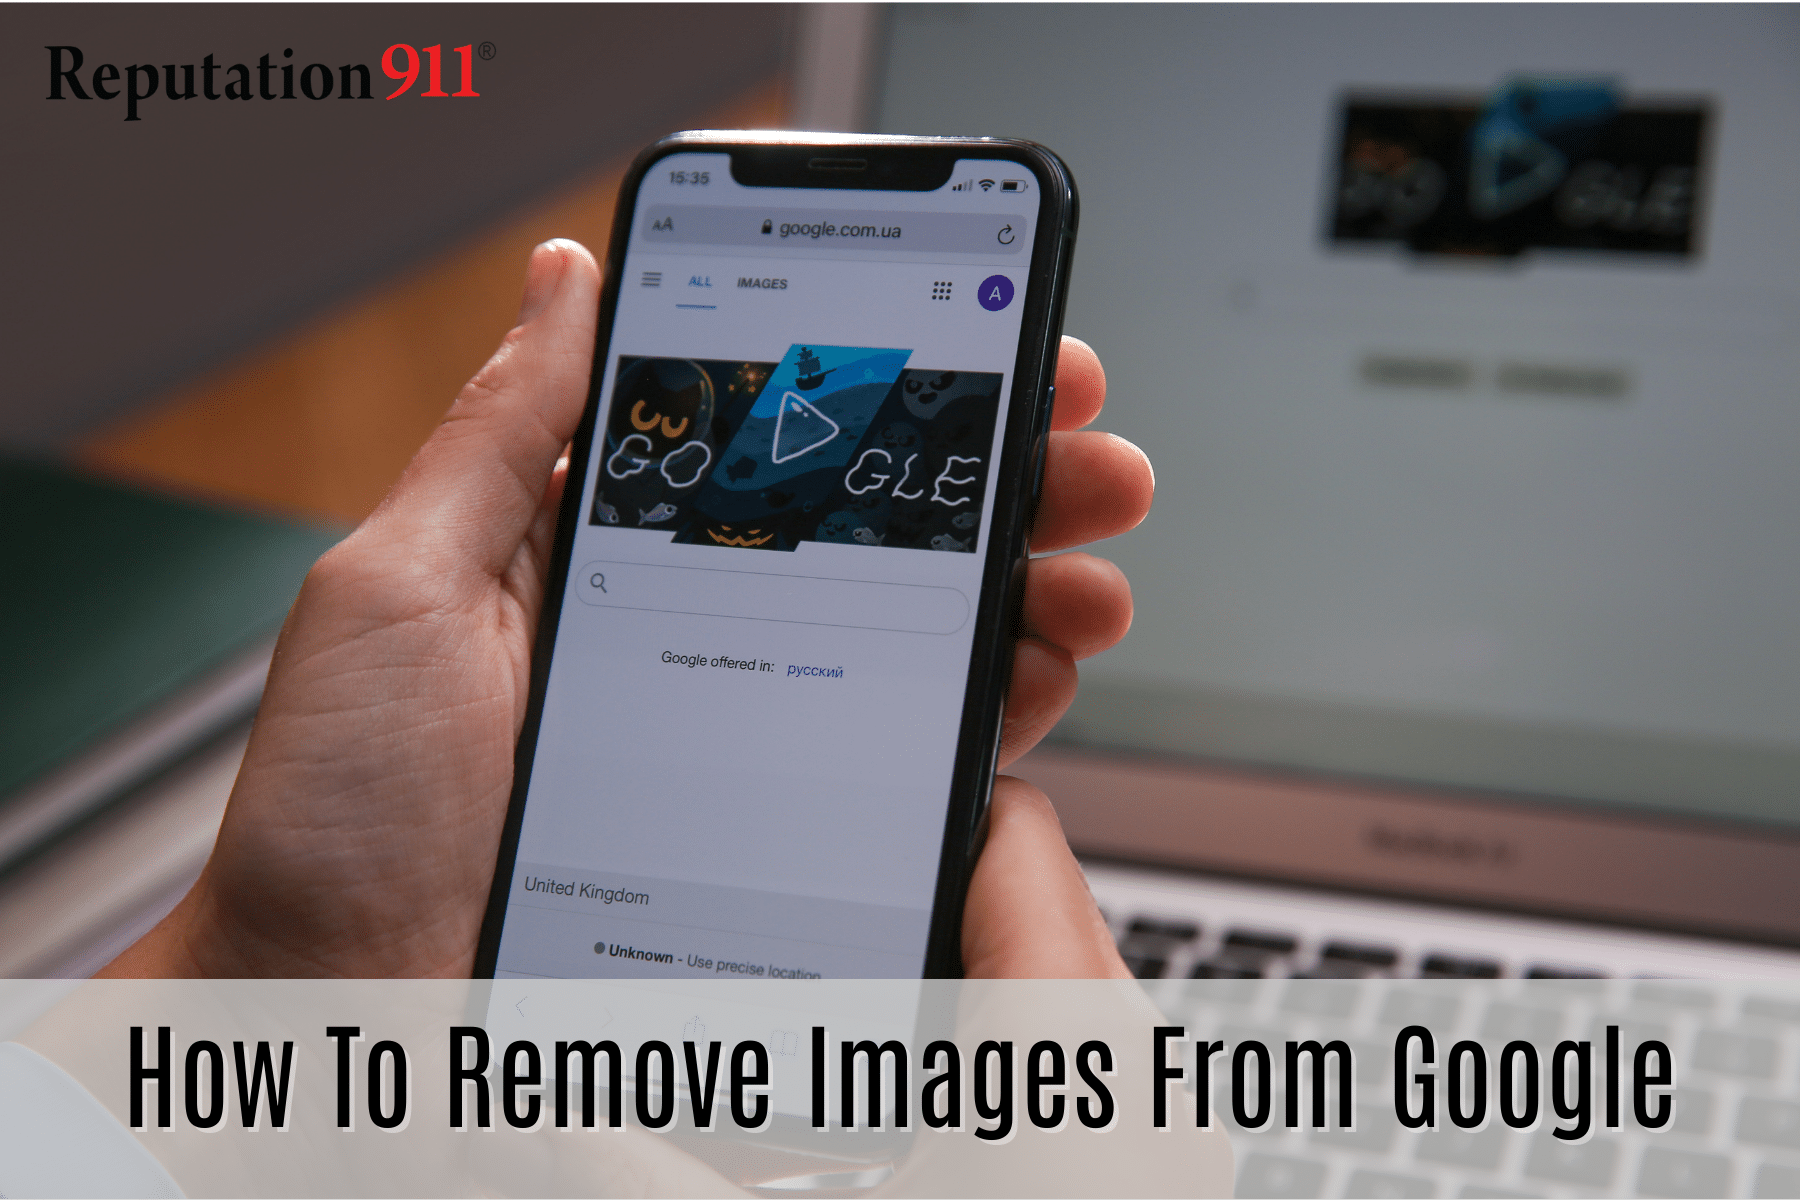 how to remove images from google reputation 911